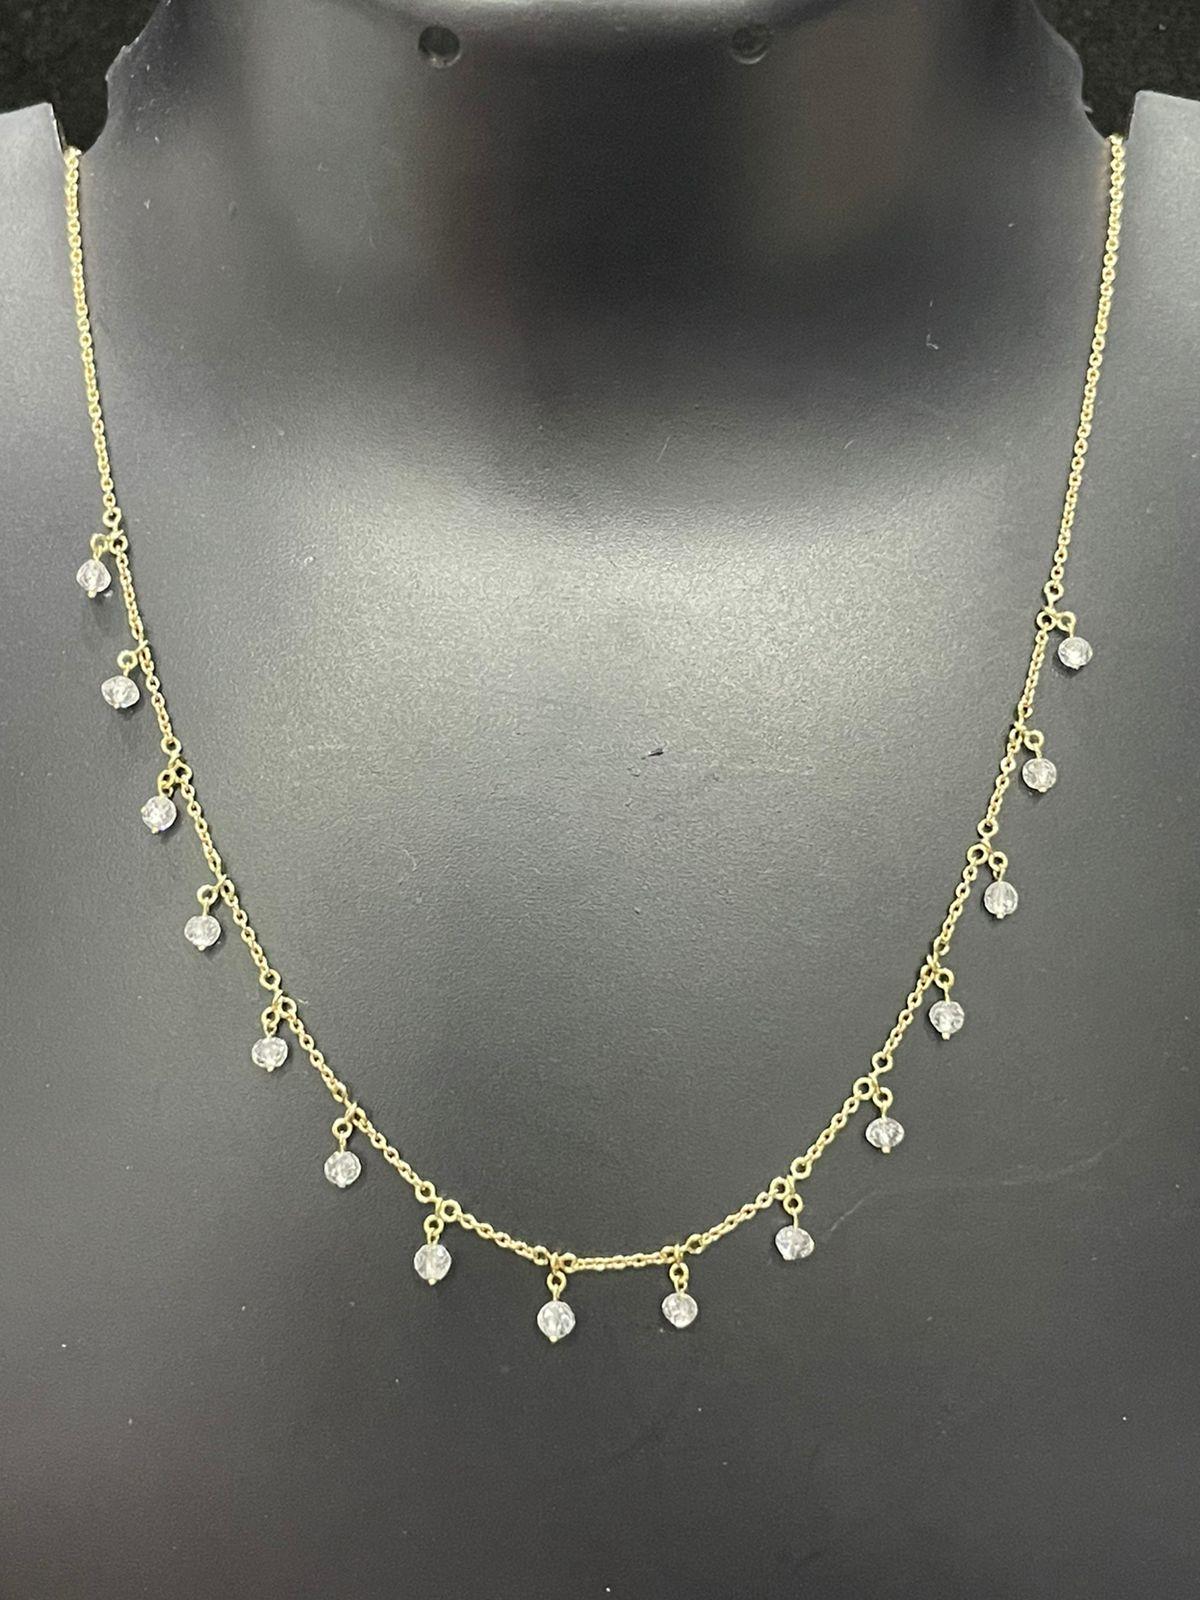 PANIM 18K White Gold Diamond Beads Dangling Necklace For Sale 4